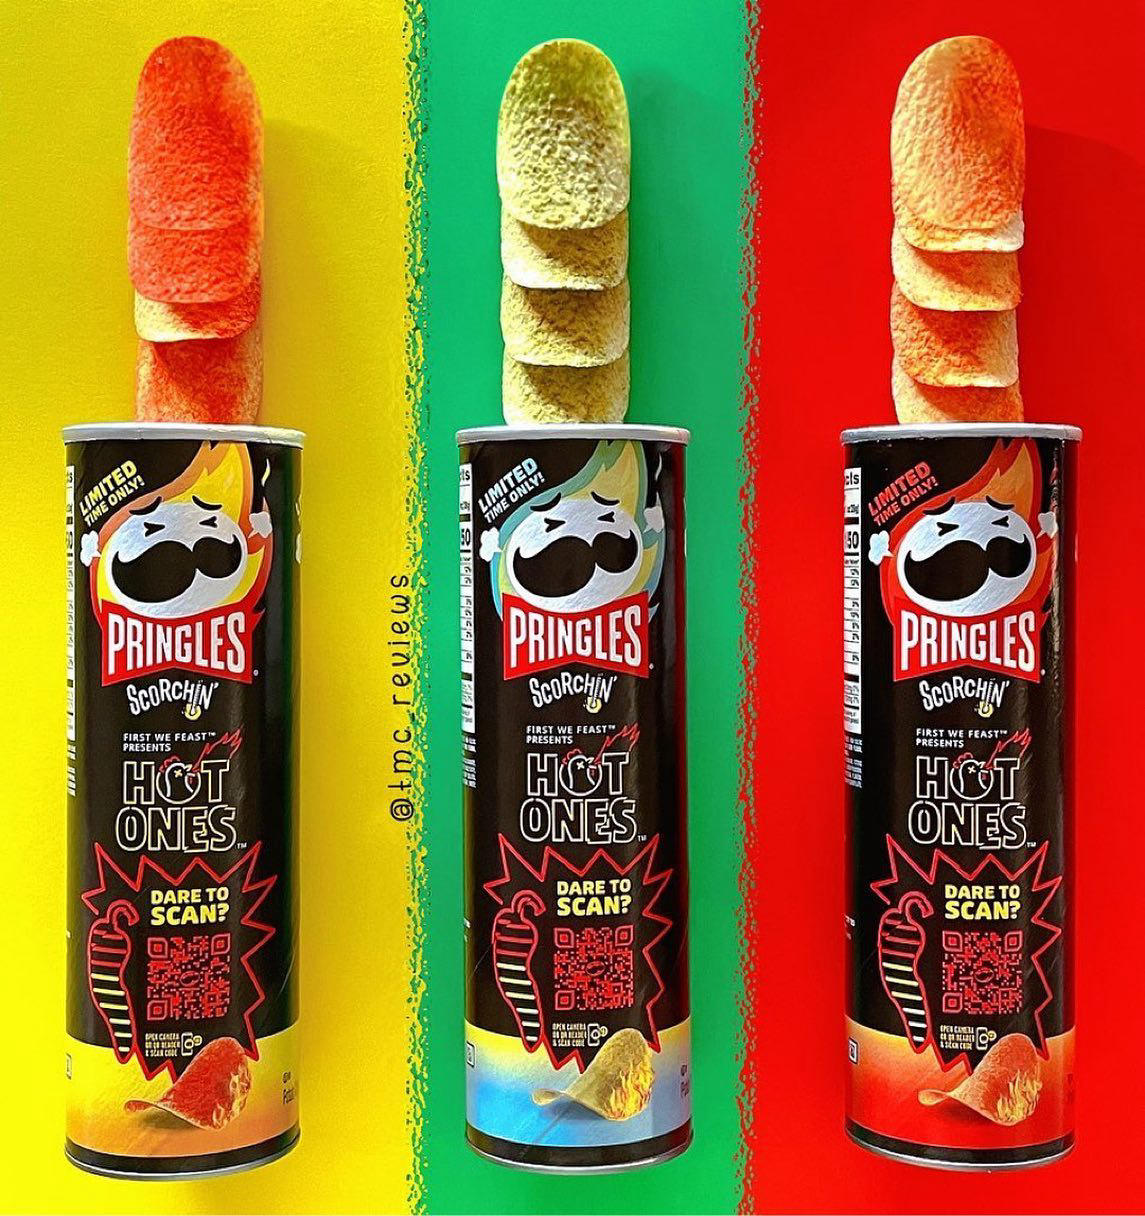 Pringles - What’s the hottest level of #Pringles #HotOnes you’ve been able to handle